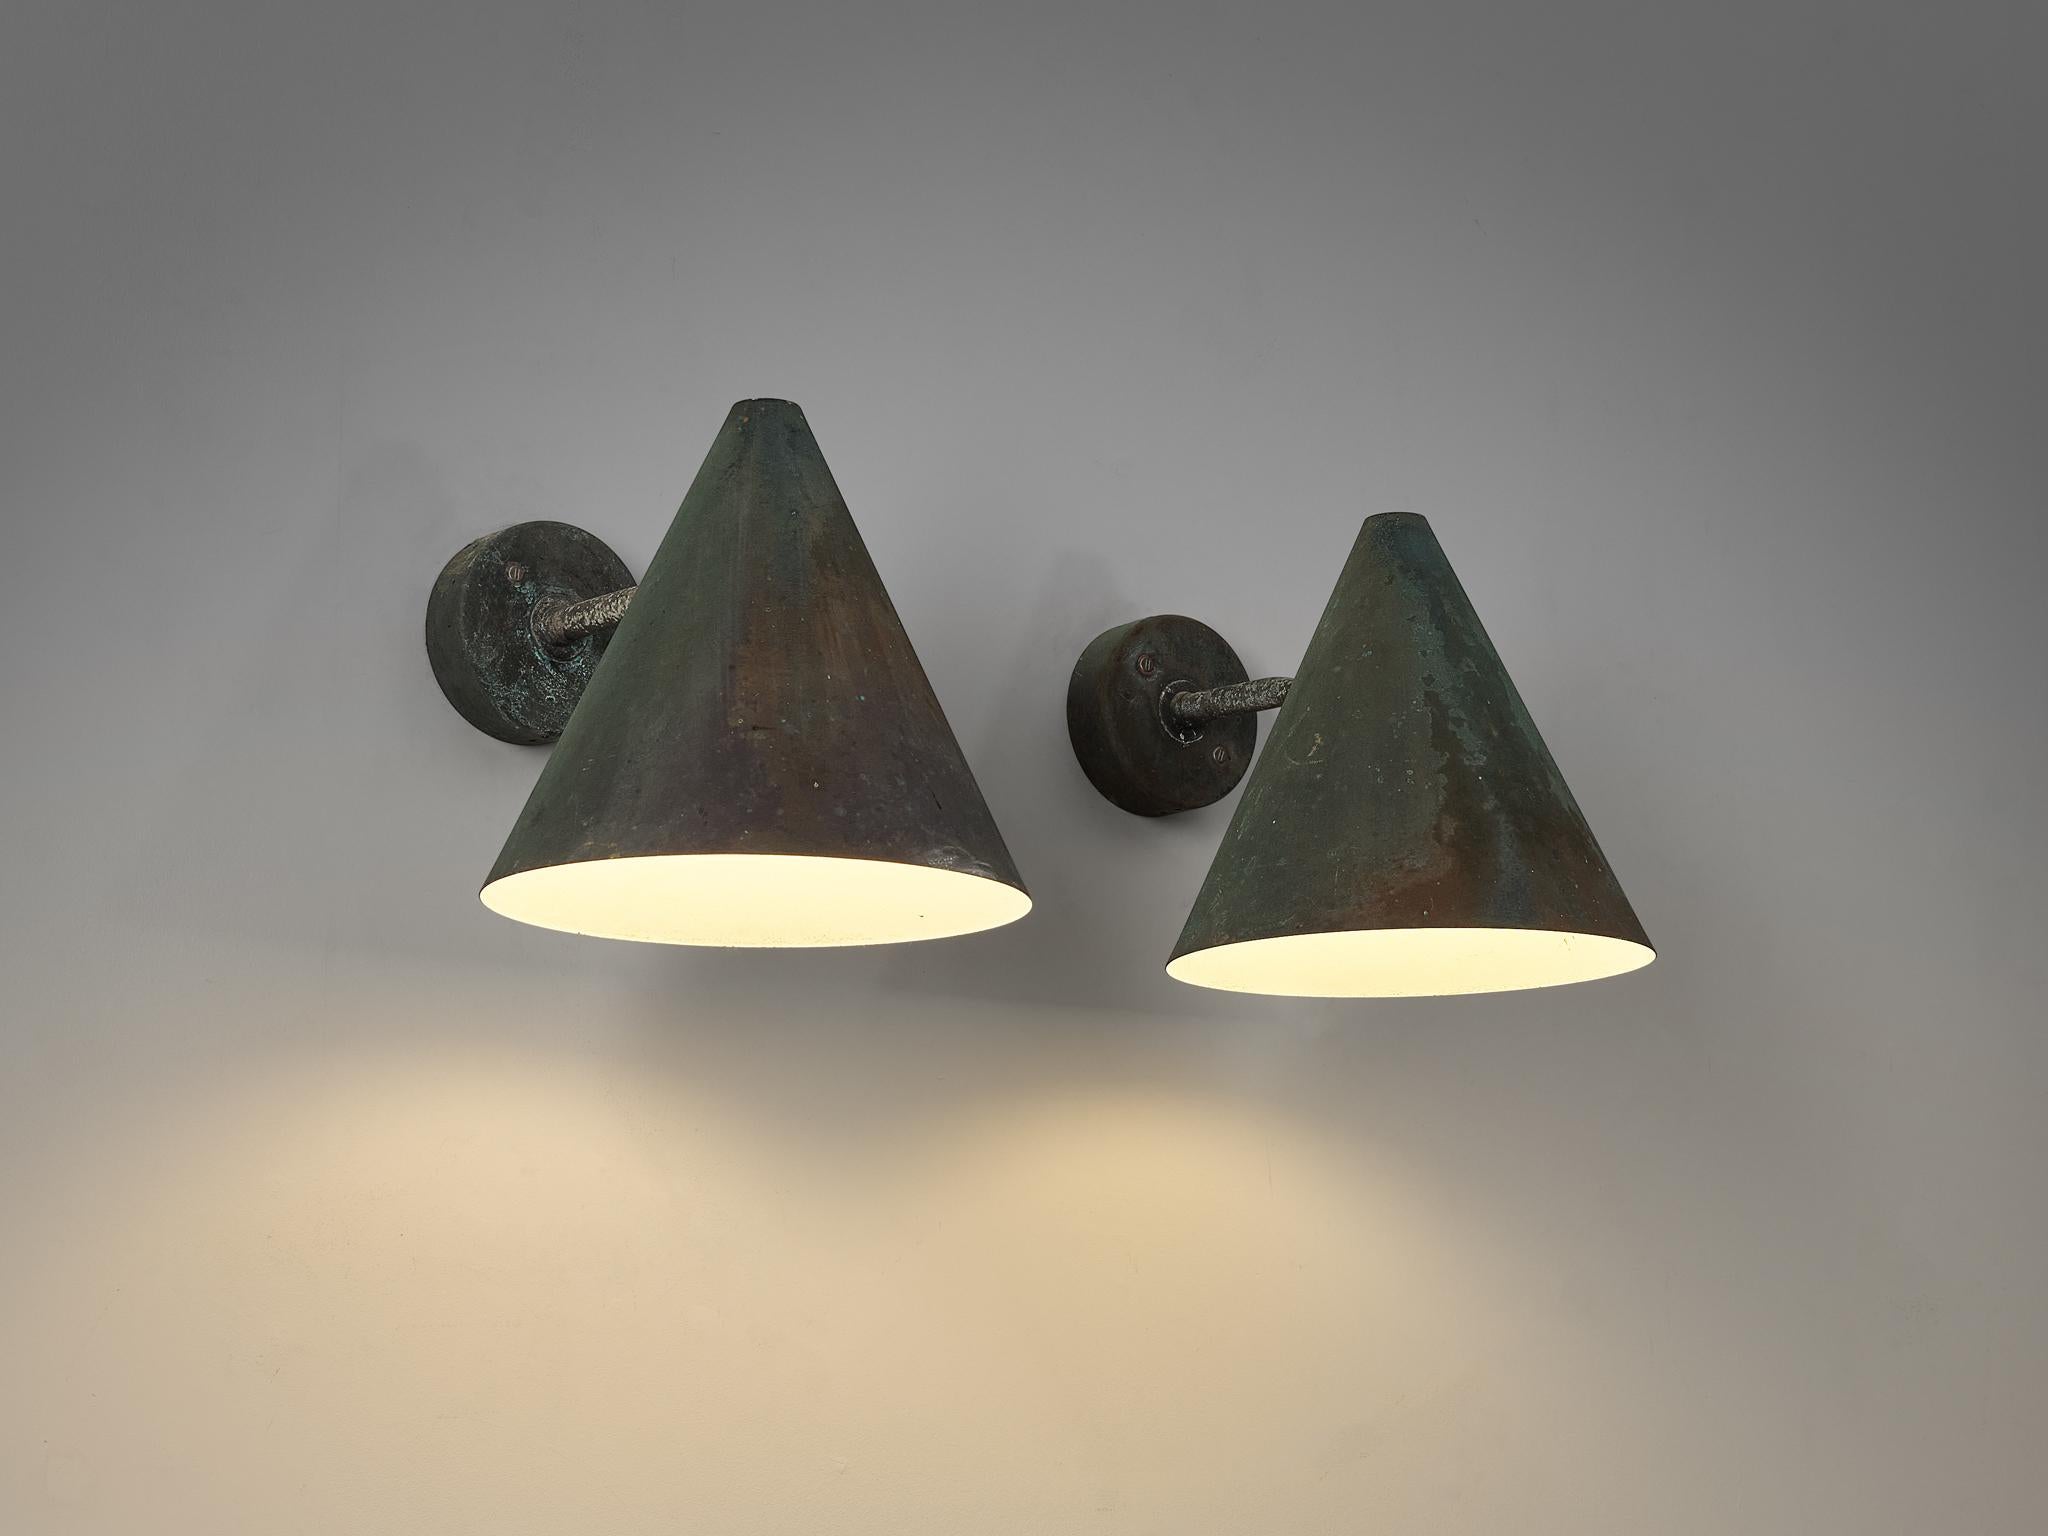  Hans-Agne Jakobsson 'Tratten' Wall Lights in Patinated Copper  In Good Condition For Sale In Waalwijk, NL